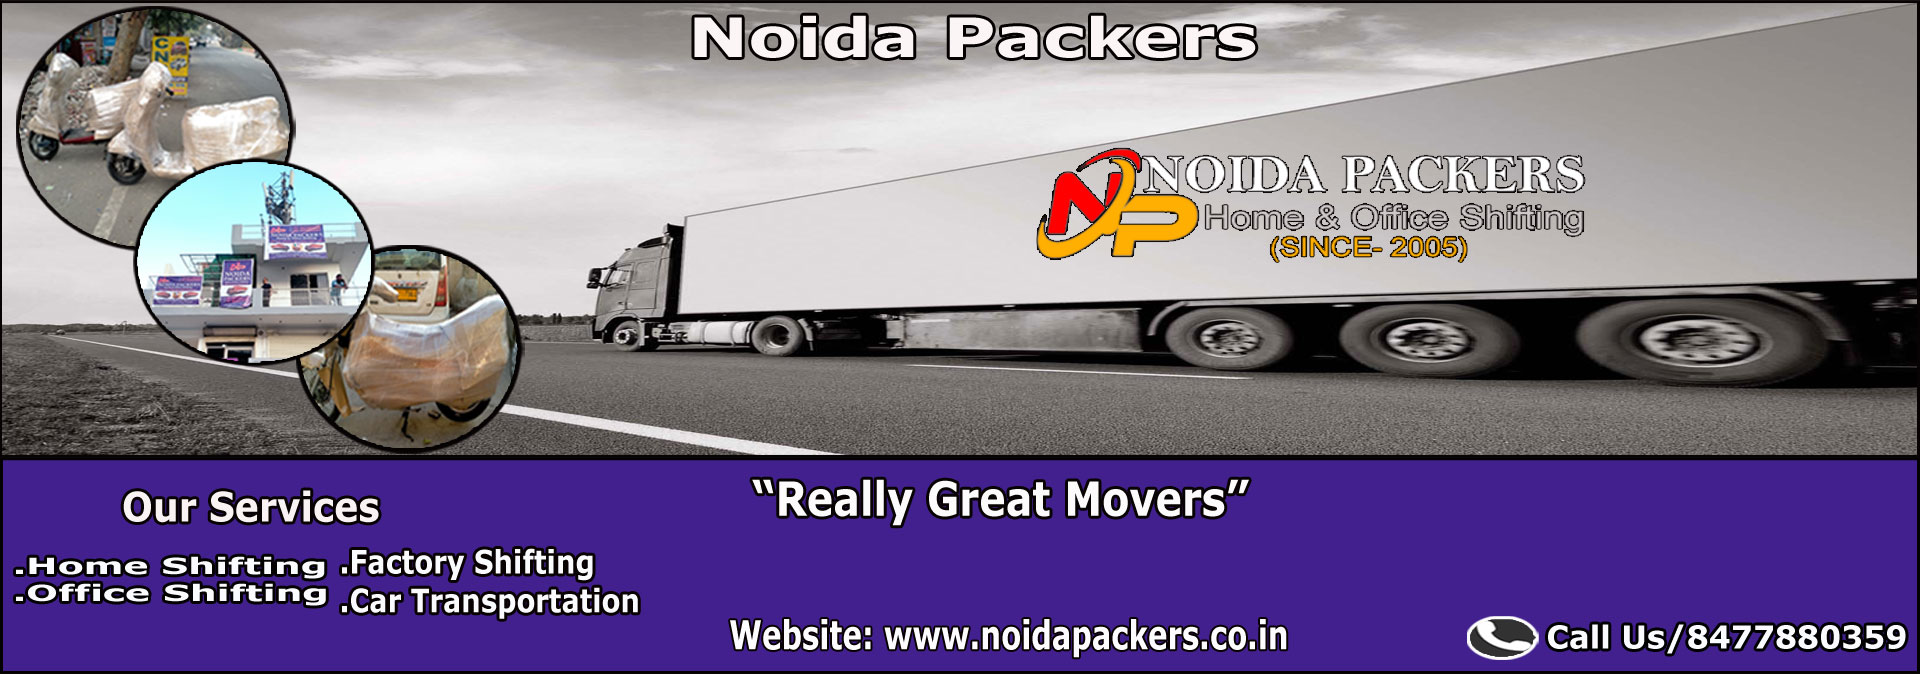 Movers ande Packers Noida Sector 133